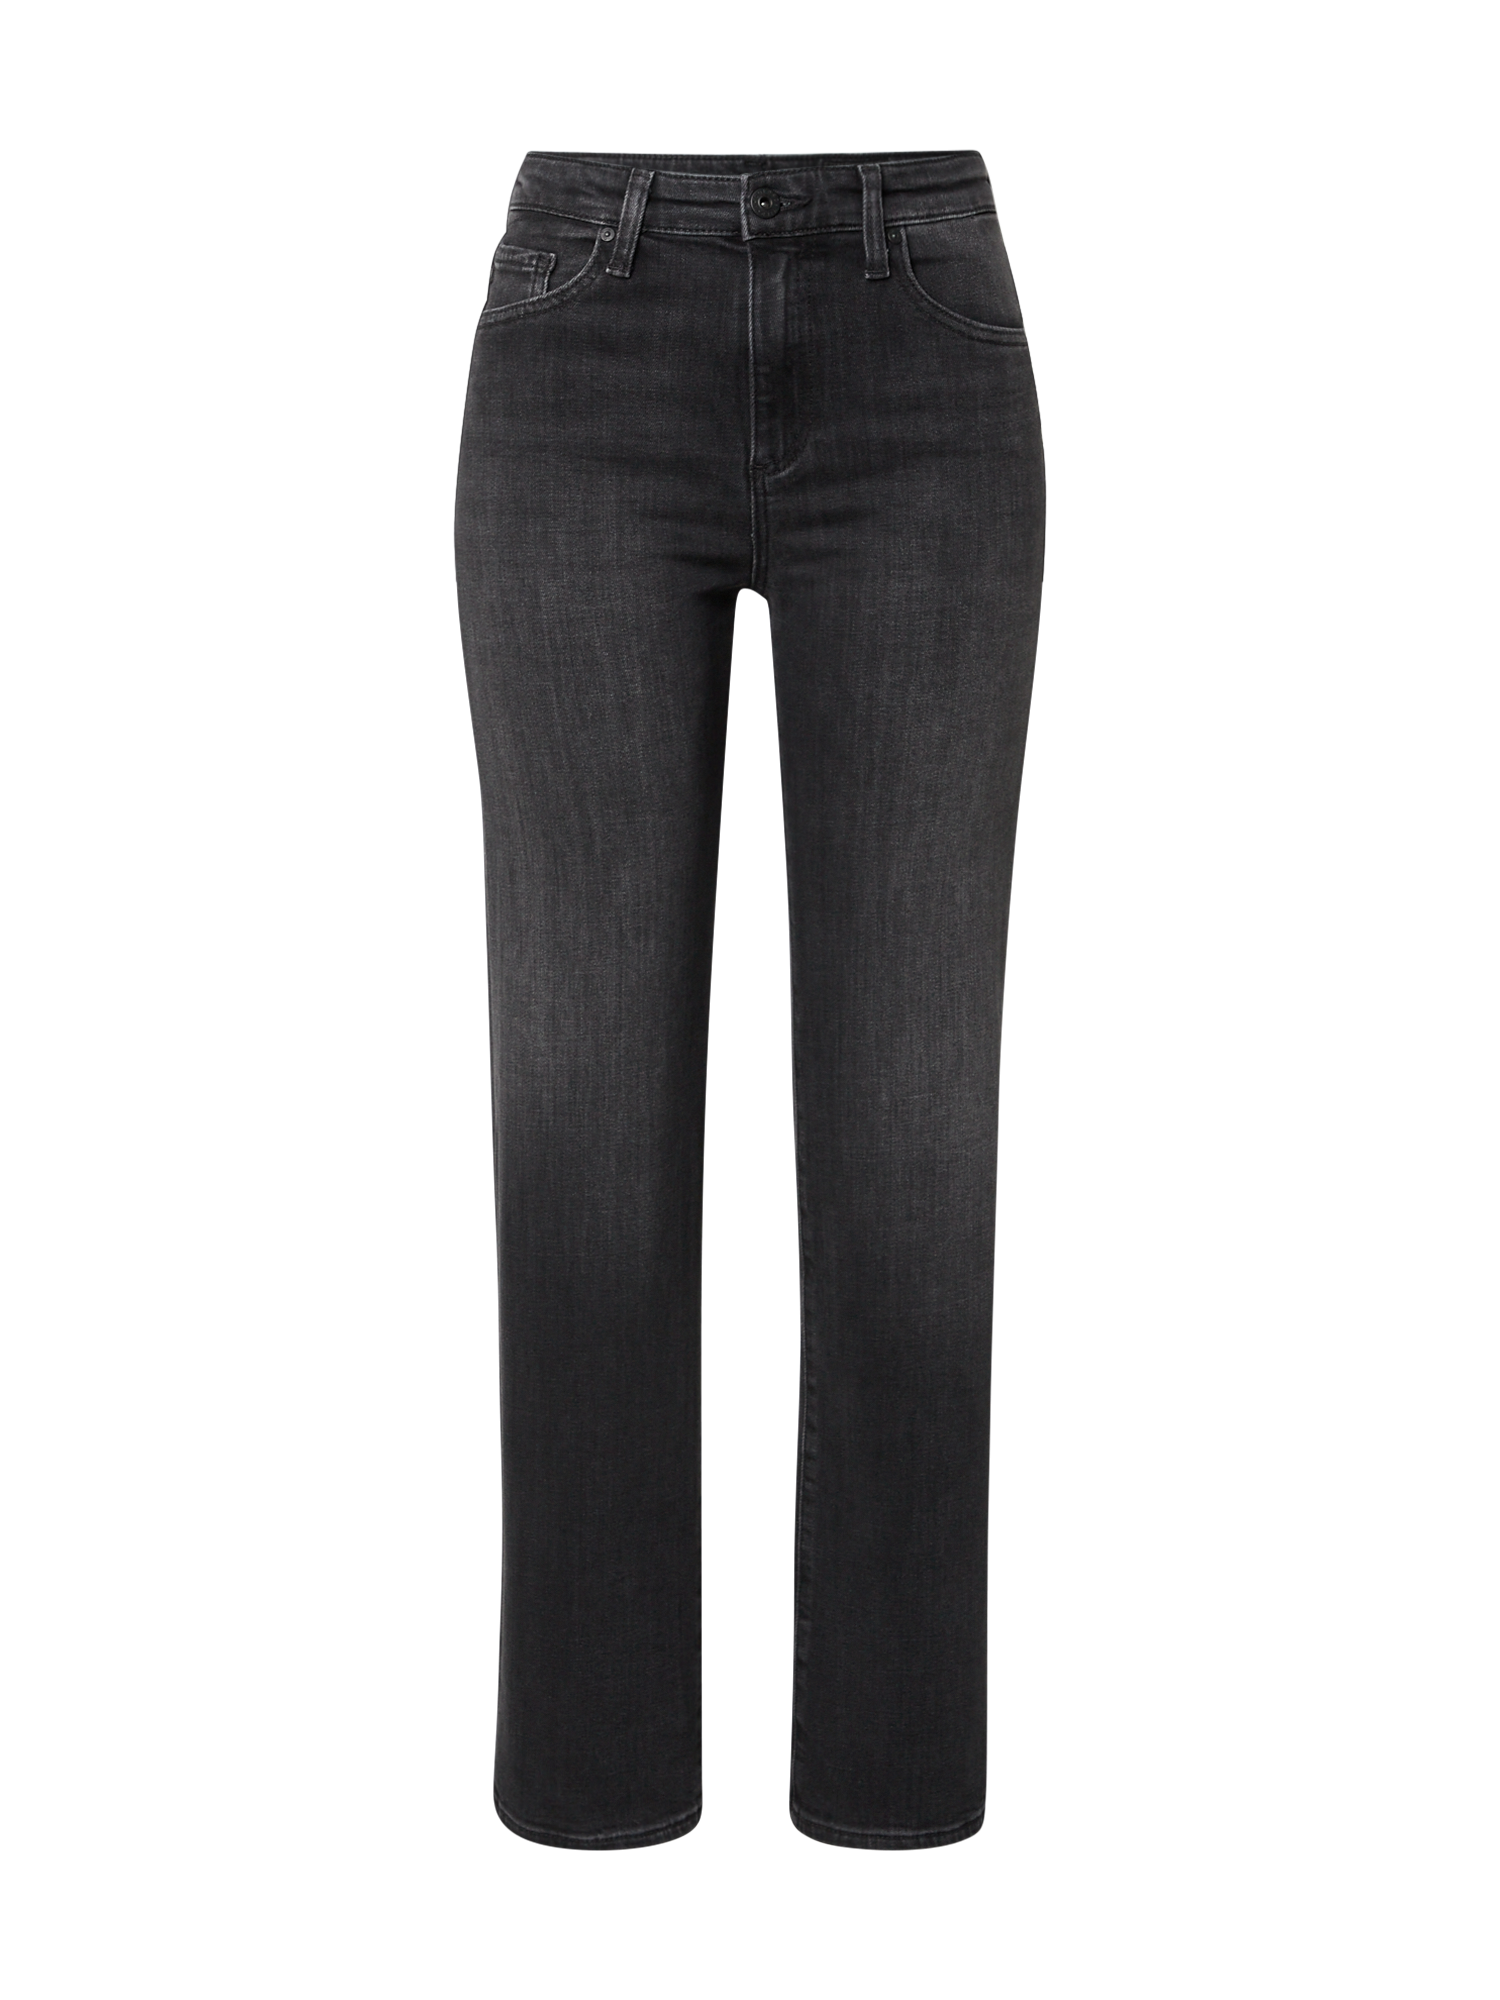 PROMO 3oCse AG Jeans Jeans ALEXXIS in Nero 